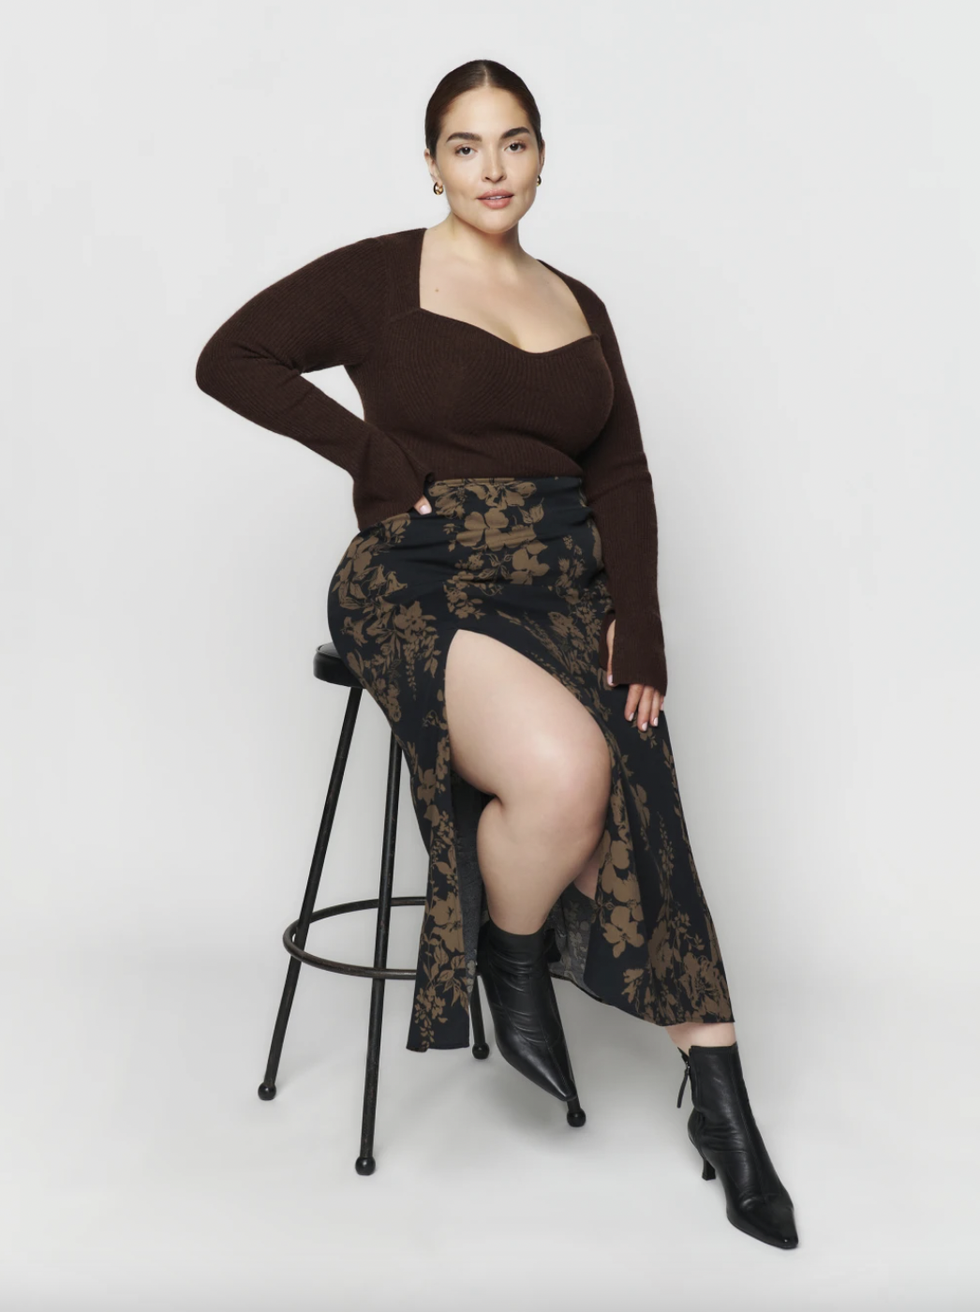 Shein Plus Size Winter Haul + Putting Outfits Together